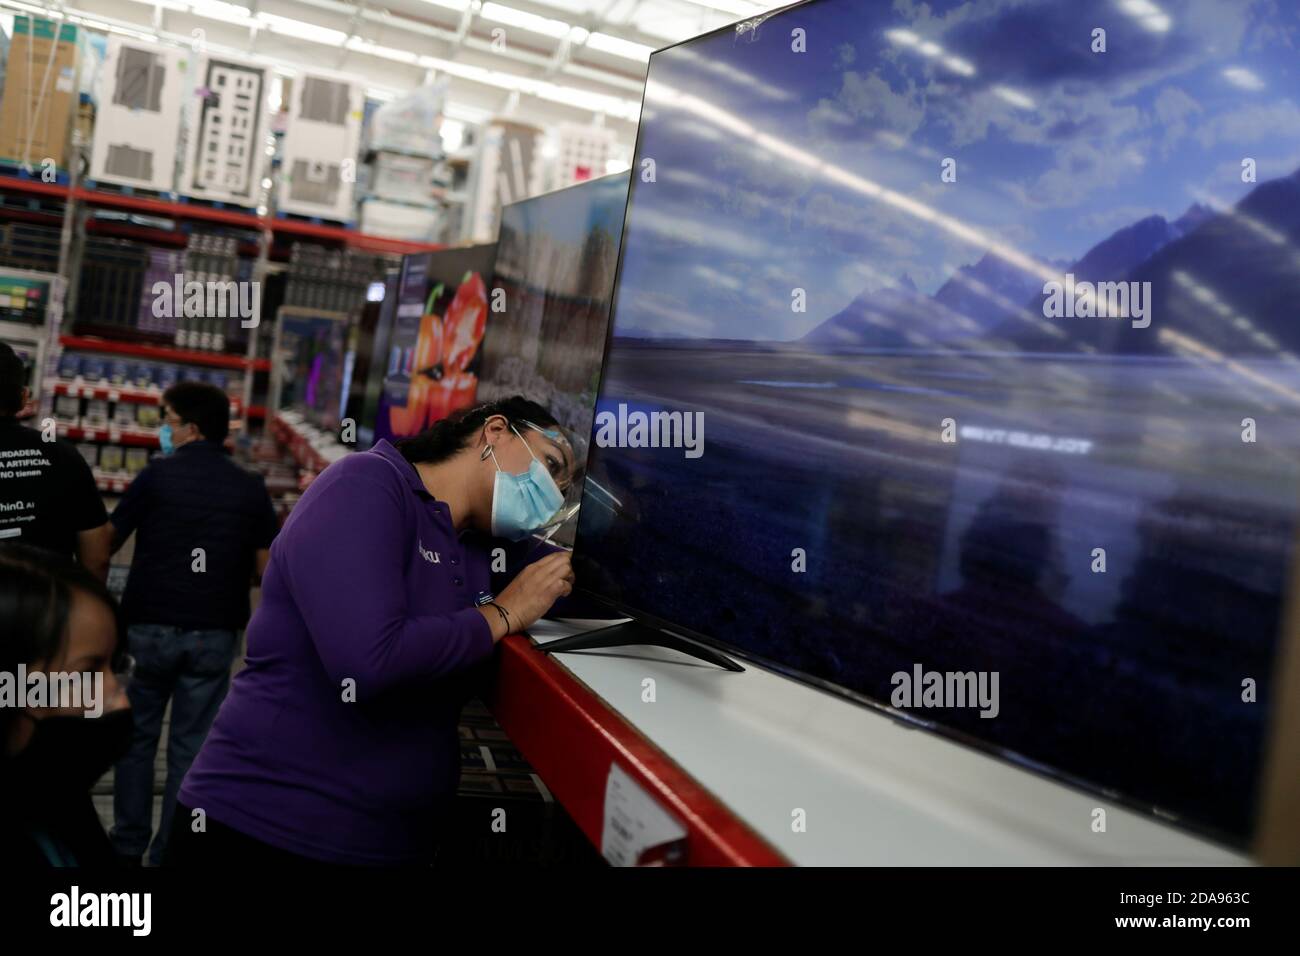 A woman looks at a television during the shopping season, 'El Buen Fin'  (The Good Weekend), at a Sam's Club store, as the coronavirus disease  (COVID-19) outbreak continues, in Mexico City, Mexico,